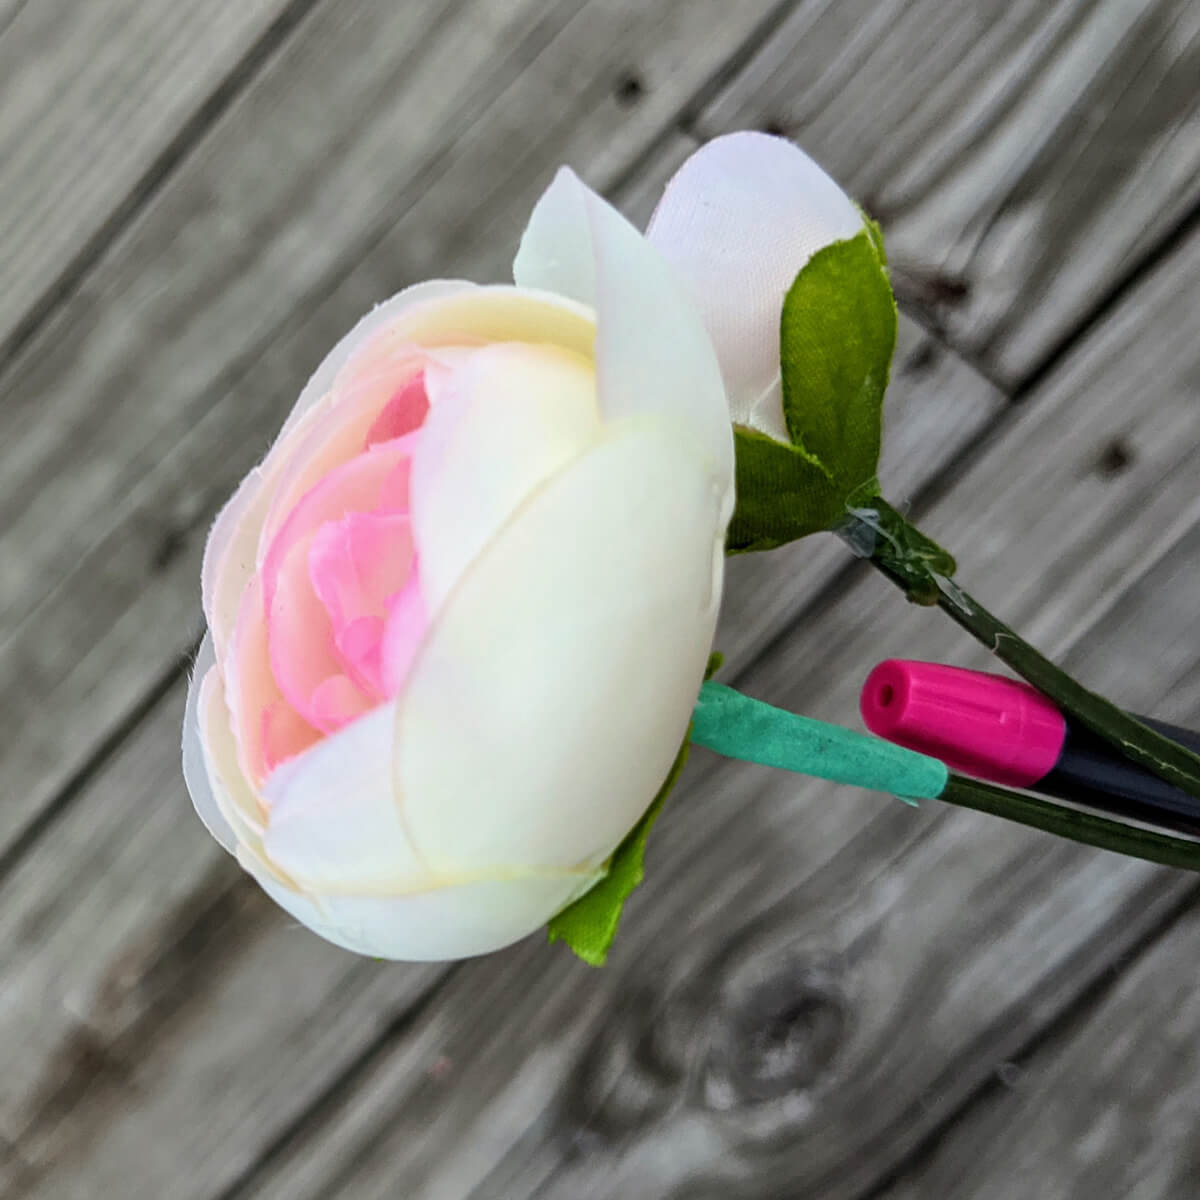 Line up the flower and pen to make pen roses.